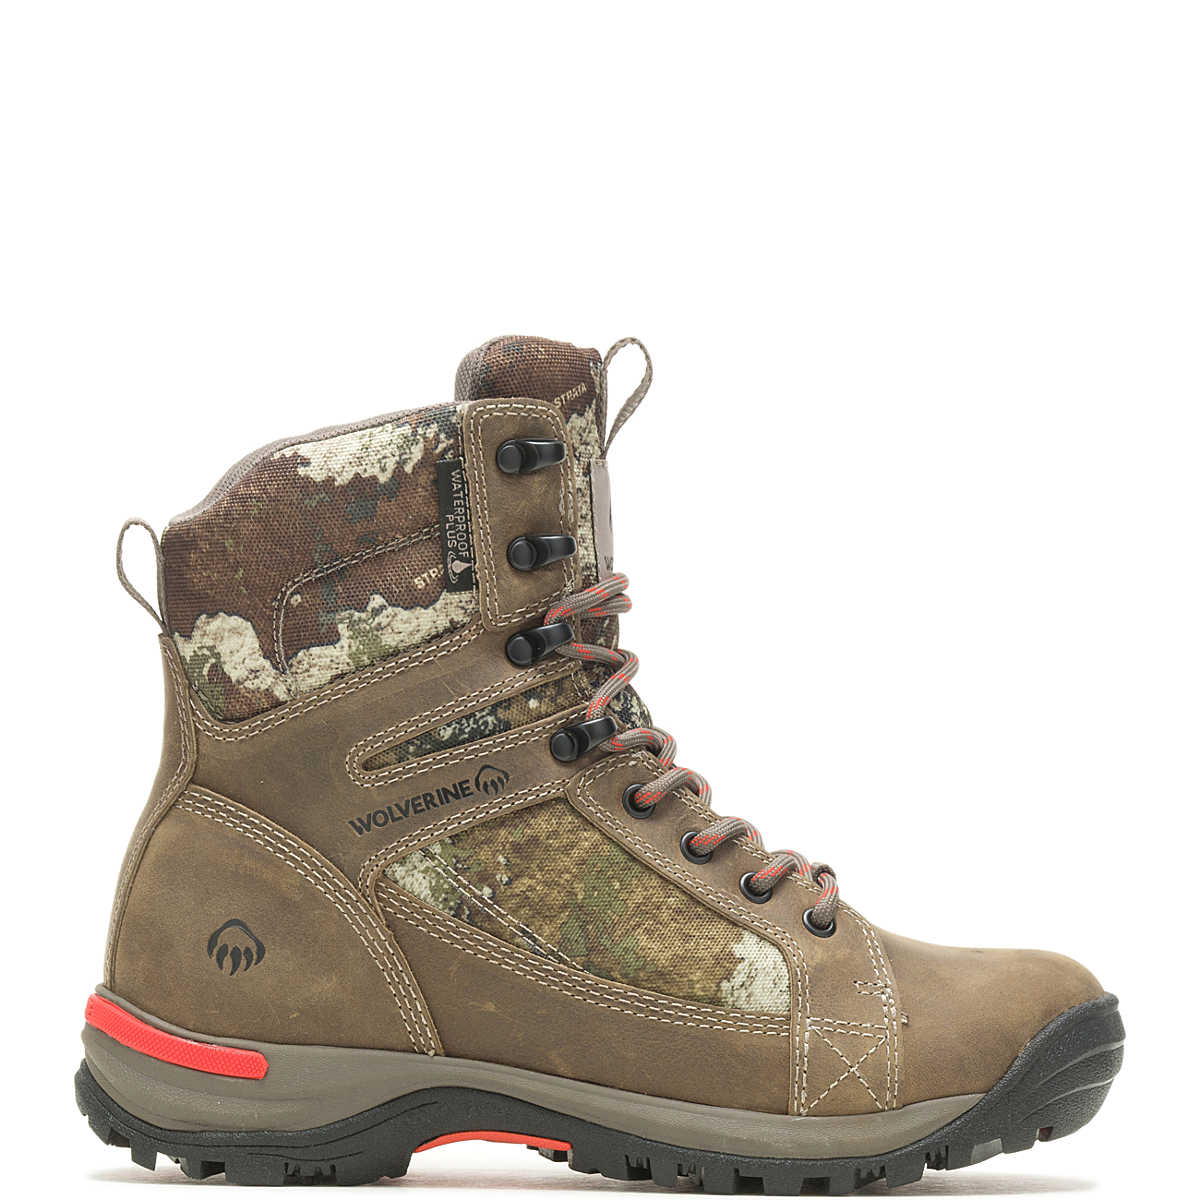 Sightline Insulated 7" Boot, Gravel/True Timber, dynamic 1